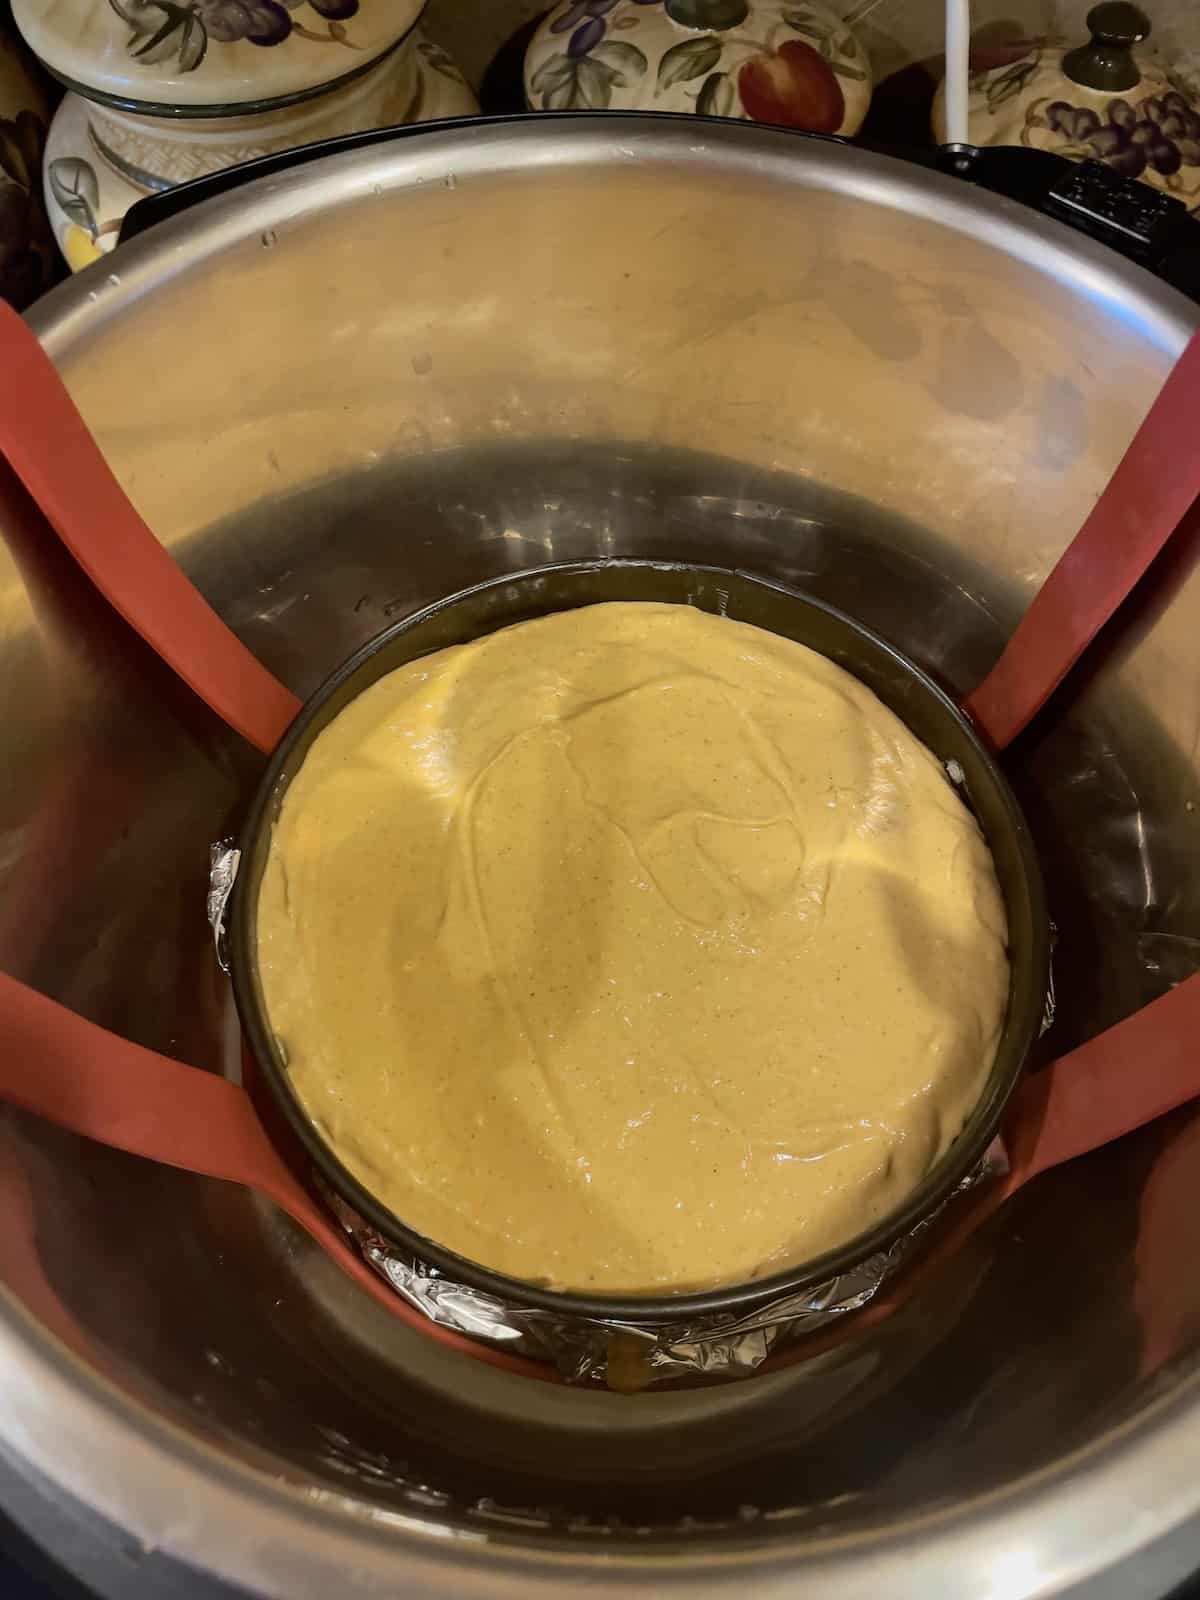 cheesecake poured into a pan inside the inner pot